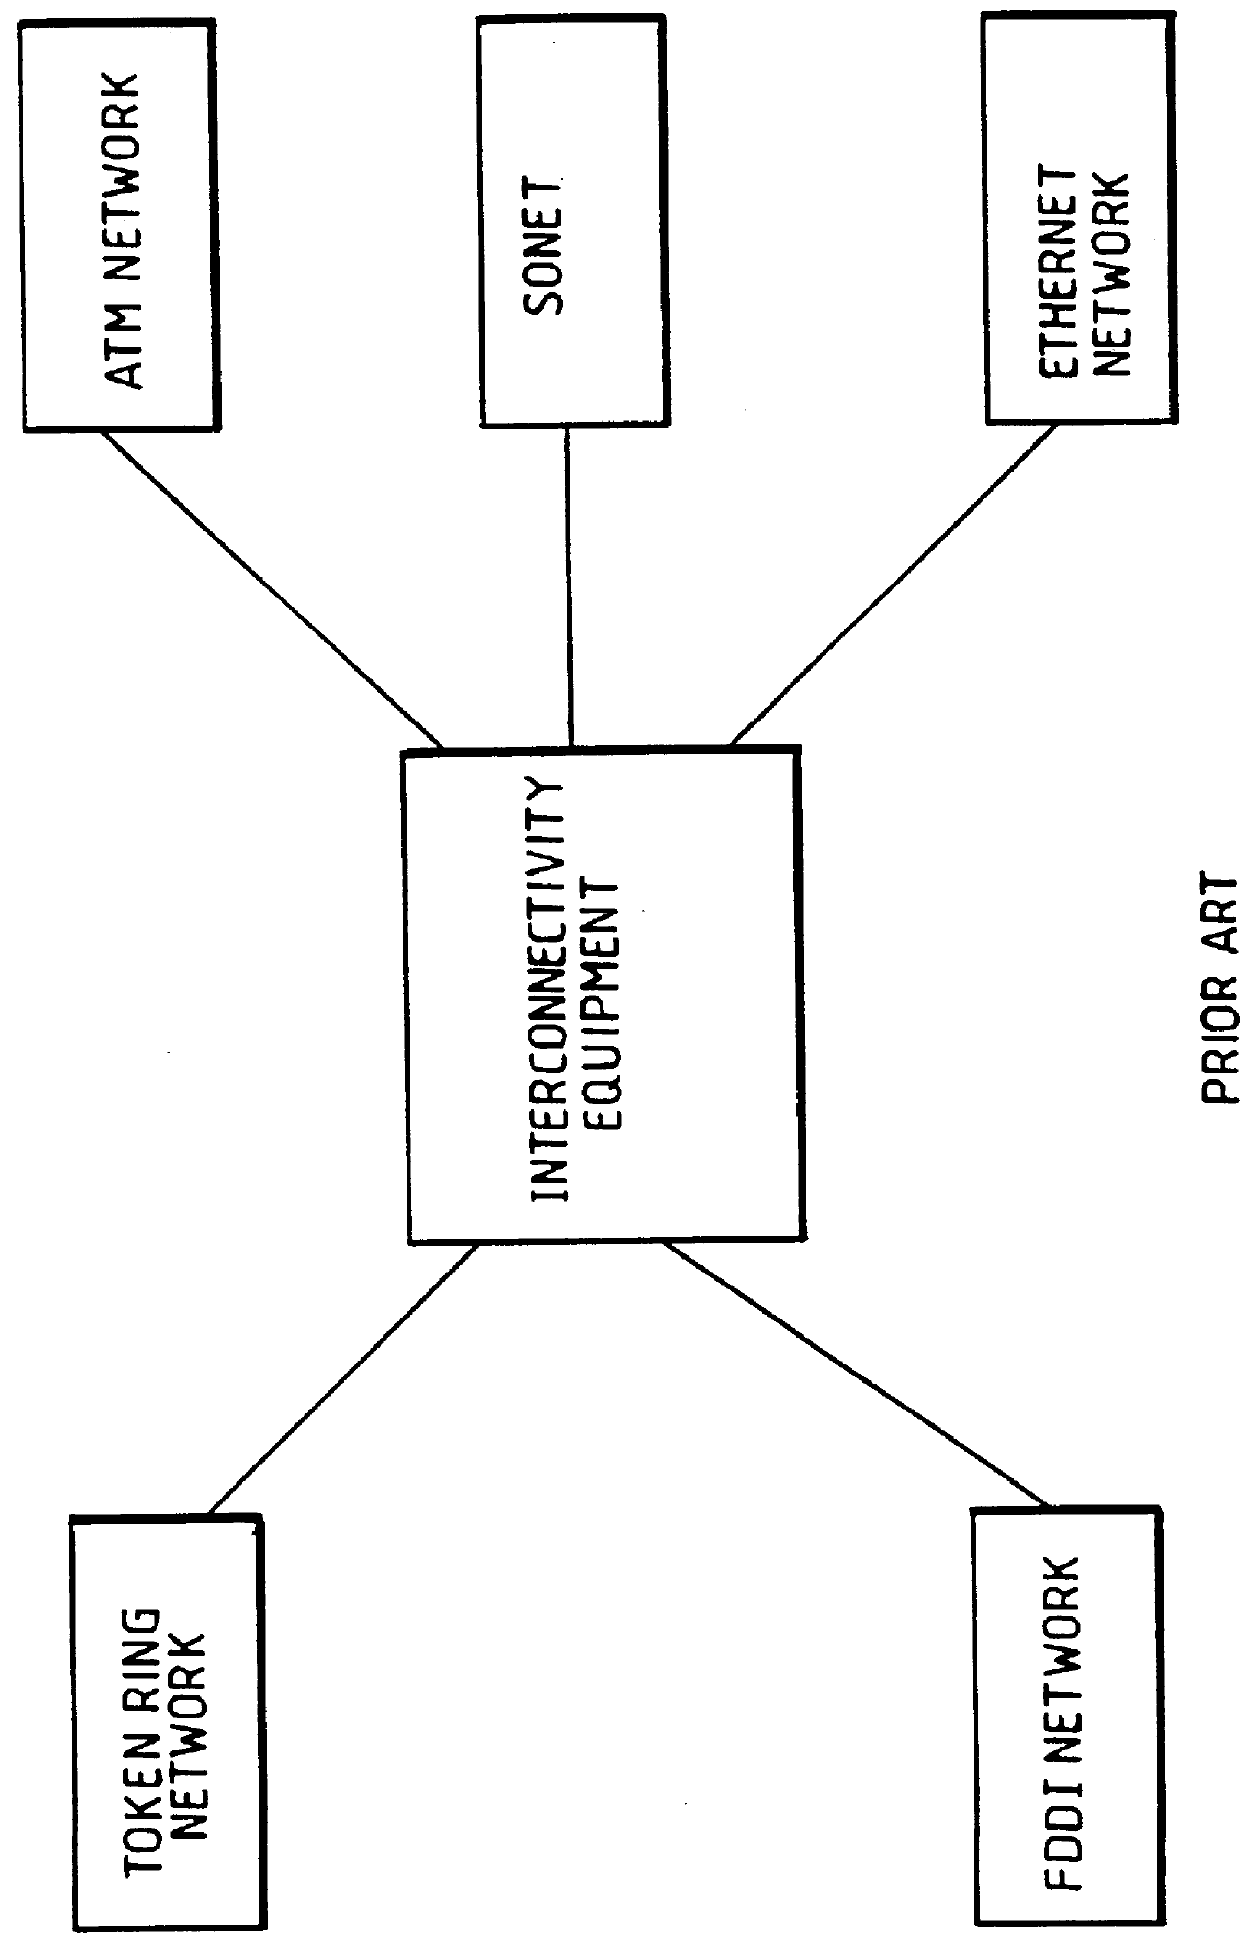 Multi-port internally cached DRAM system utilizing independent serial interfaces and buffers arbitratively connected under a dynamic configuration to allow access to a common internal bus